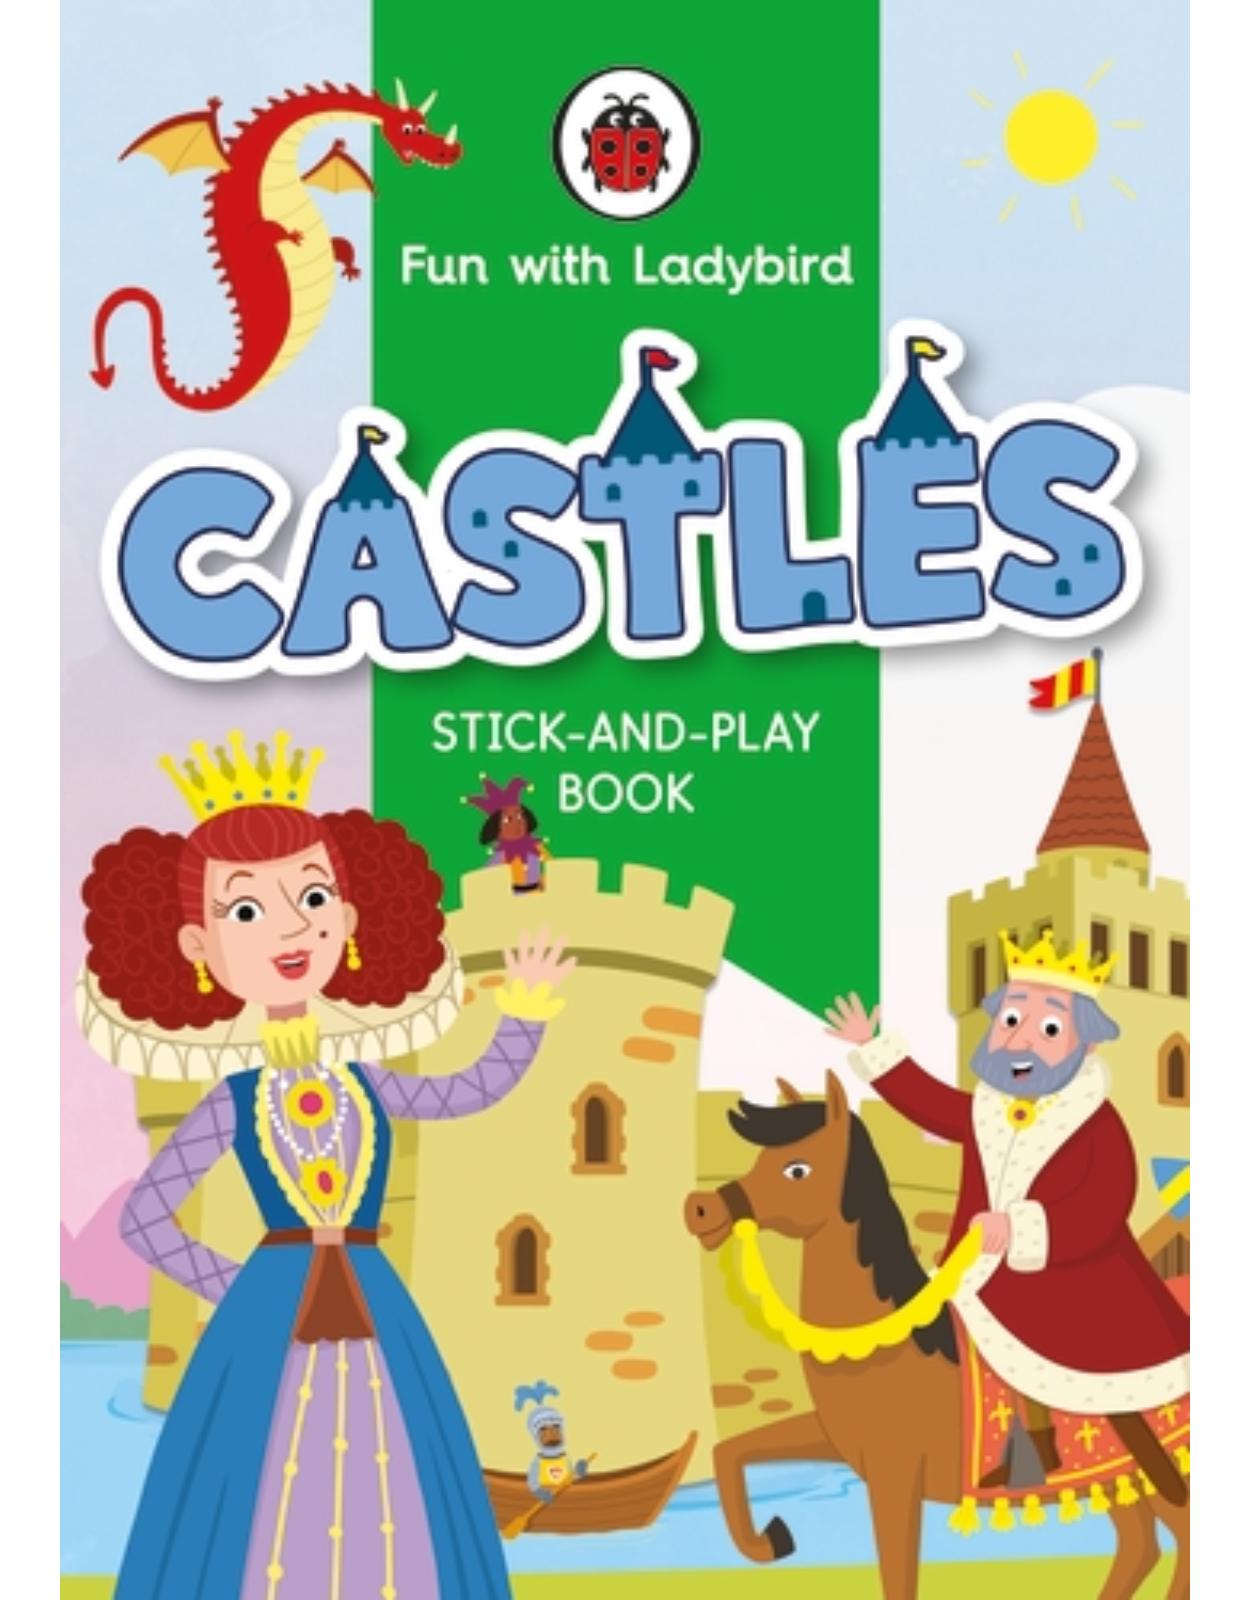 Fun With Ladybird: Stick-And-Play Book: Castles